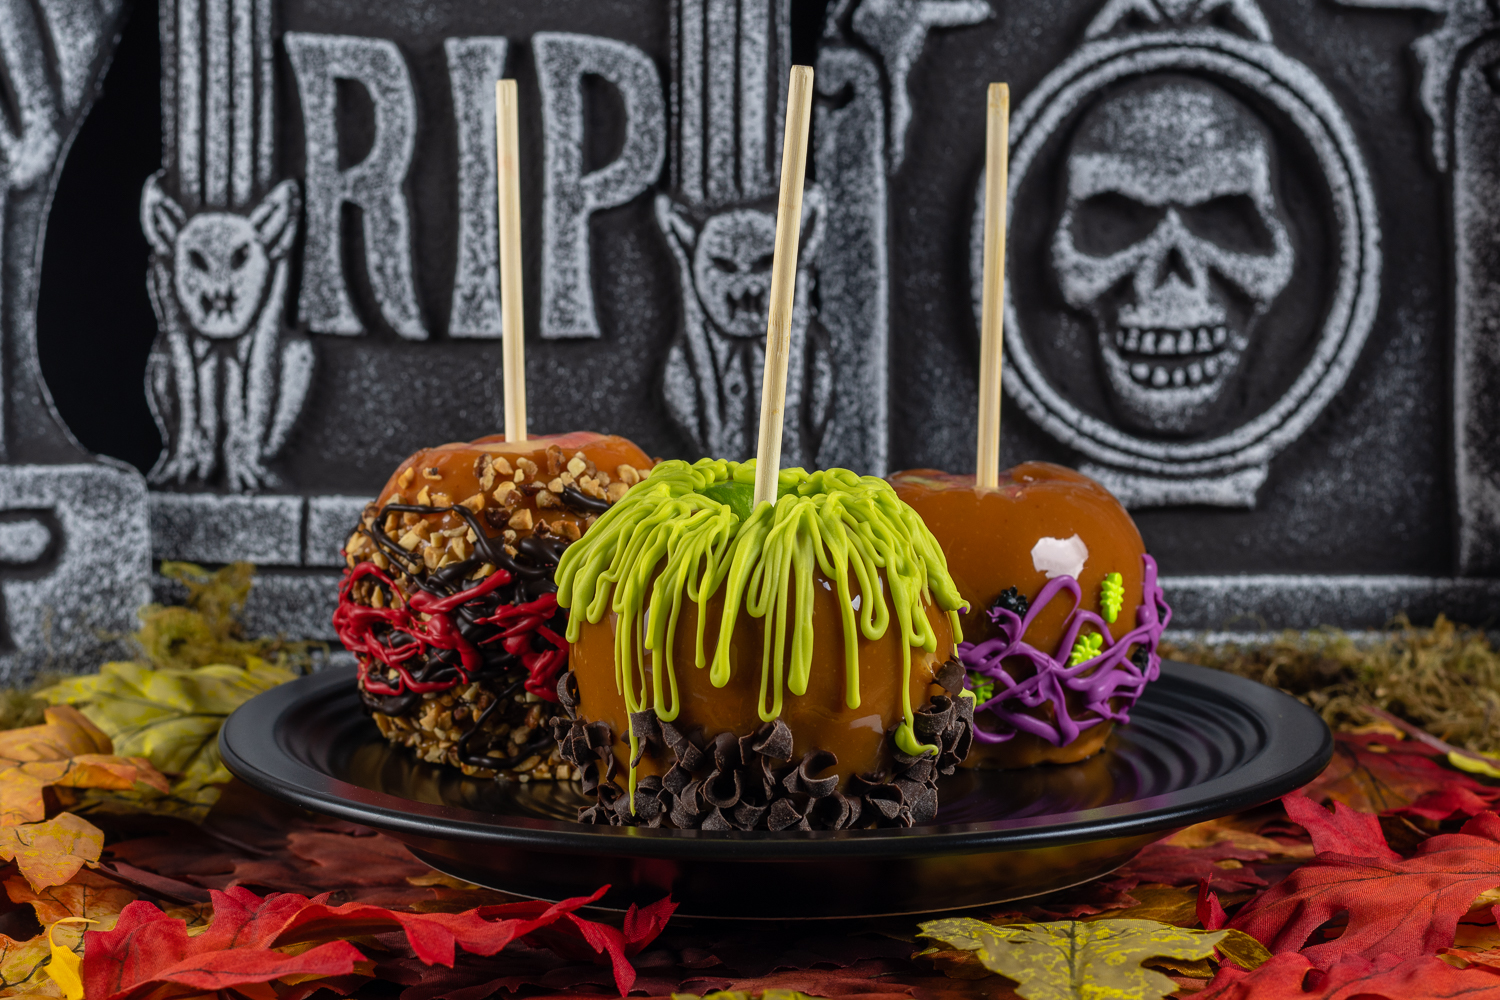 Caramel Apples | Disney Recipes | Halloween Recipes | The Geeks are celebreating Halloween early with their recipe for Sanderson Sisters' Caramel Apples inspired by the Disney film Hocus Pocus! [sponsored] 2geekswhoeat.com 